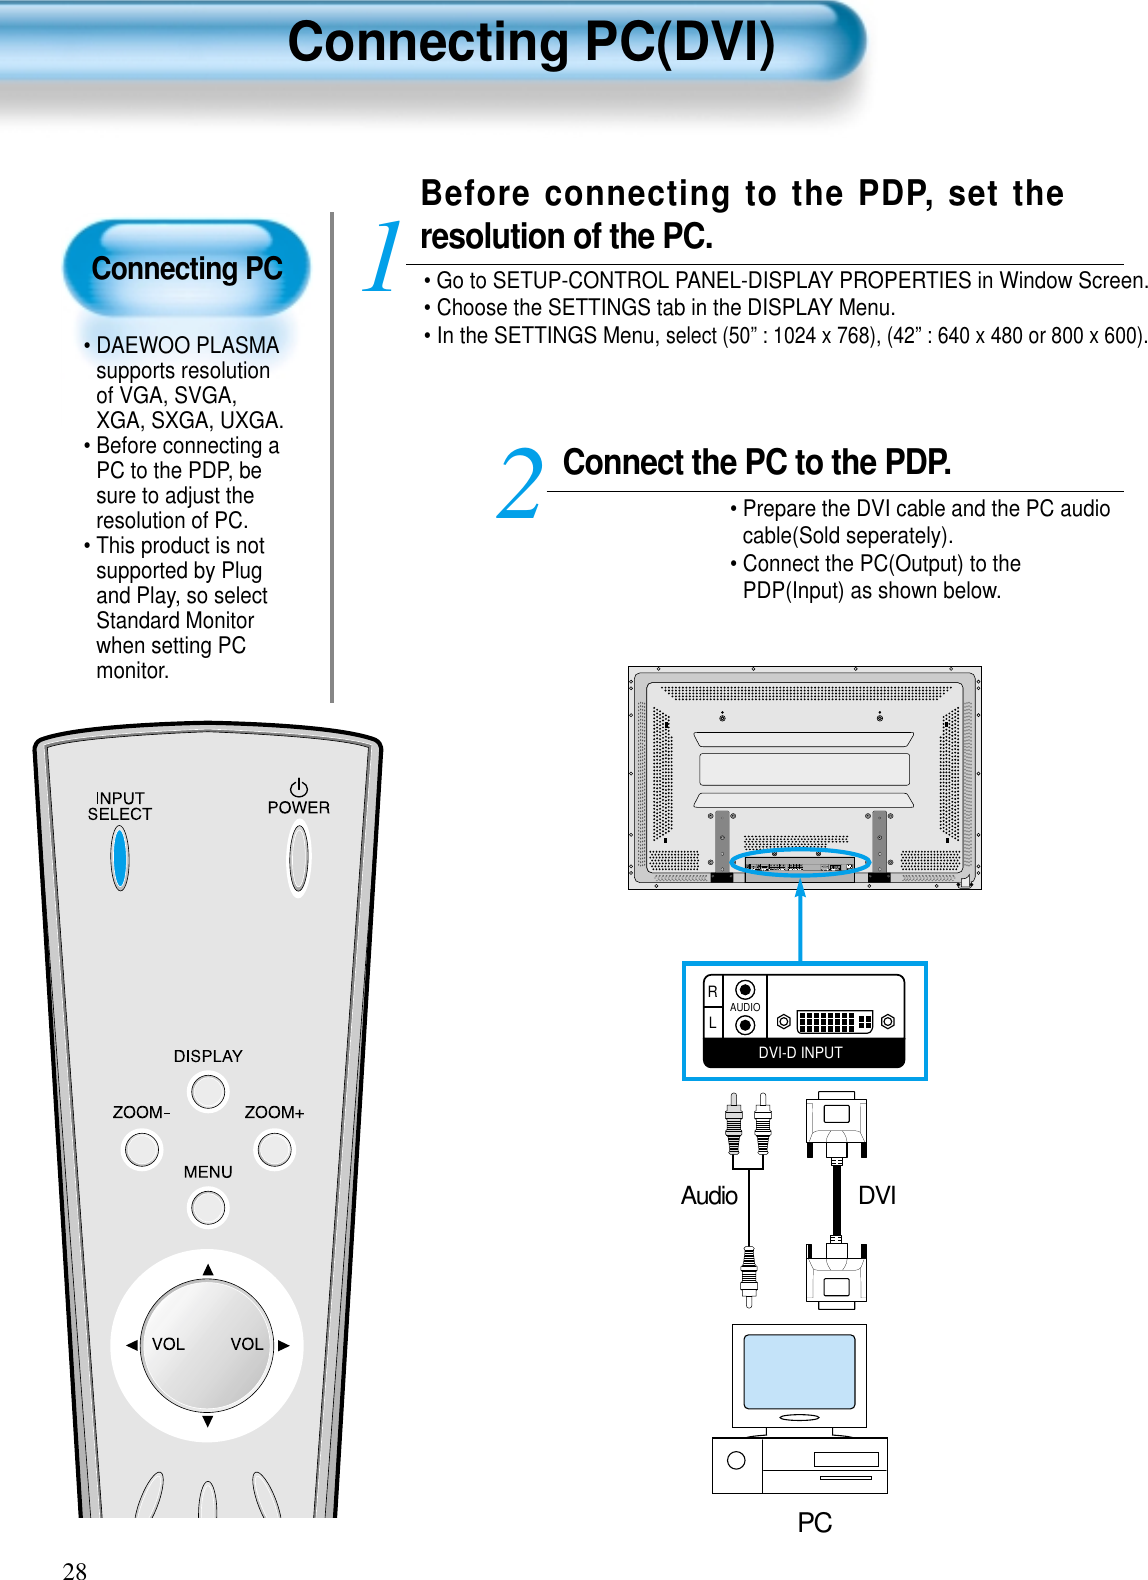 Connecting PC• DAEWOO PLASMAsupports resolutionof VGA, SVGA,XGA, SXGA, UXGA.• Before connecting aPC to the PDP, besure to adjust theresolution of PC.• This product is notsupported by Plugand Play, so selectStandard Monitorwhen setting PCmonitor.Connecting PC(DVI)28Connect the PC to the PDP.• Prepare the DVI cable and the PC audiocable(Sold seperately).• Connect the PC(Output) to thePDP(Input) as shown below. 2Before connecting to the PDP, set theresolution of the PC.• Go to SETUP-CONTROL PANEL-DISPLAY PROPERTIES in Window Screen.• Choose the SETTINGS tab in the DISPLAY Menu.• In the SETTINGS Menu, select (50” : 1024 x 768), (42” : 640 x 480 or 800 x 600).1DVI-D INPUTLRAUDIODVIAudioPC